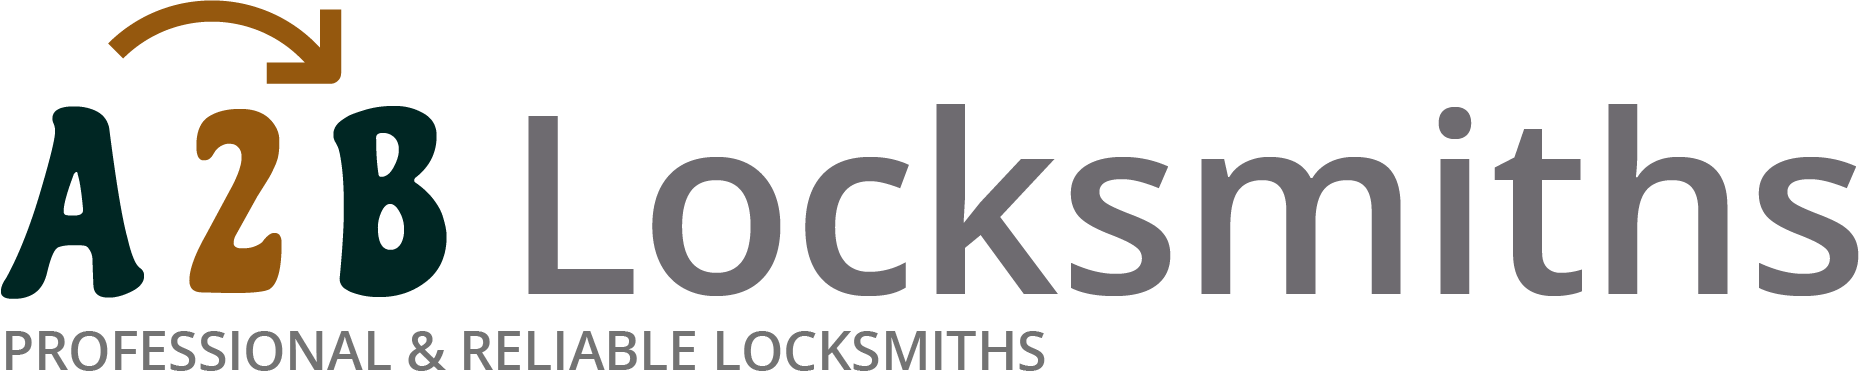 If you are locked out of house in Thurrock, our 24/7 local emergency locksmith services can help you.